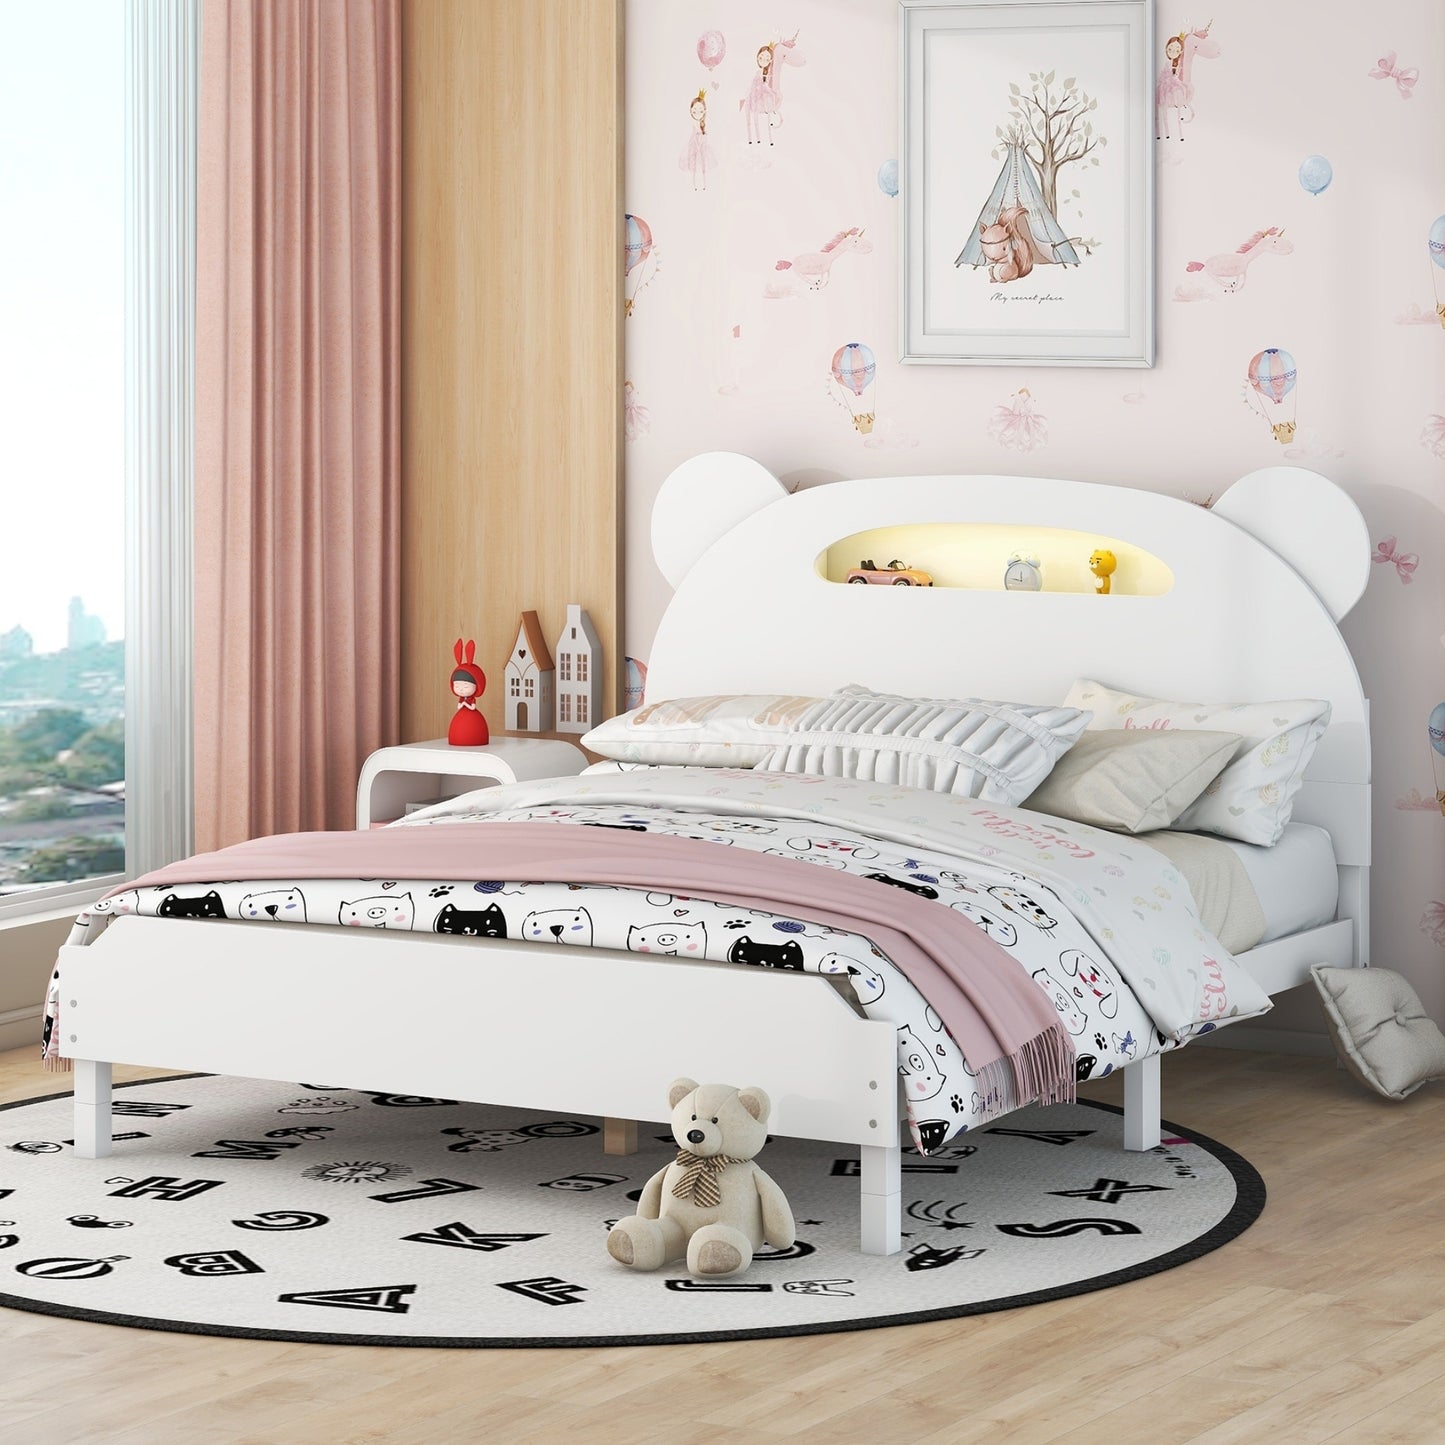 Full Size Wood Platform Bed with Bear-shaped Headboard,Bed with Motion Activated Night Lights,White